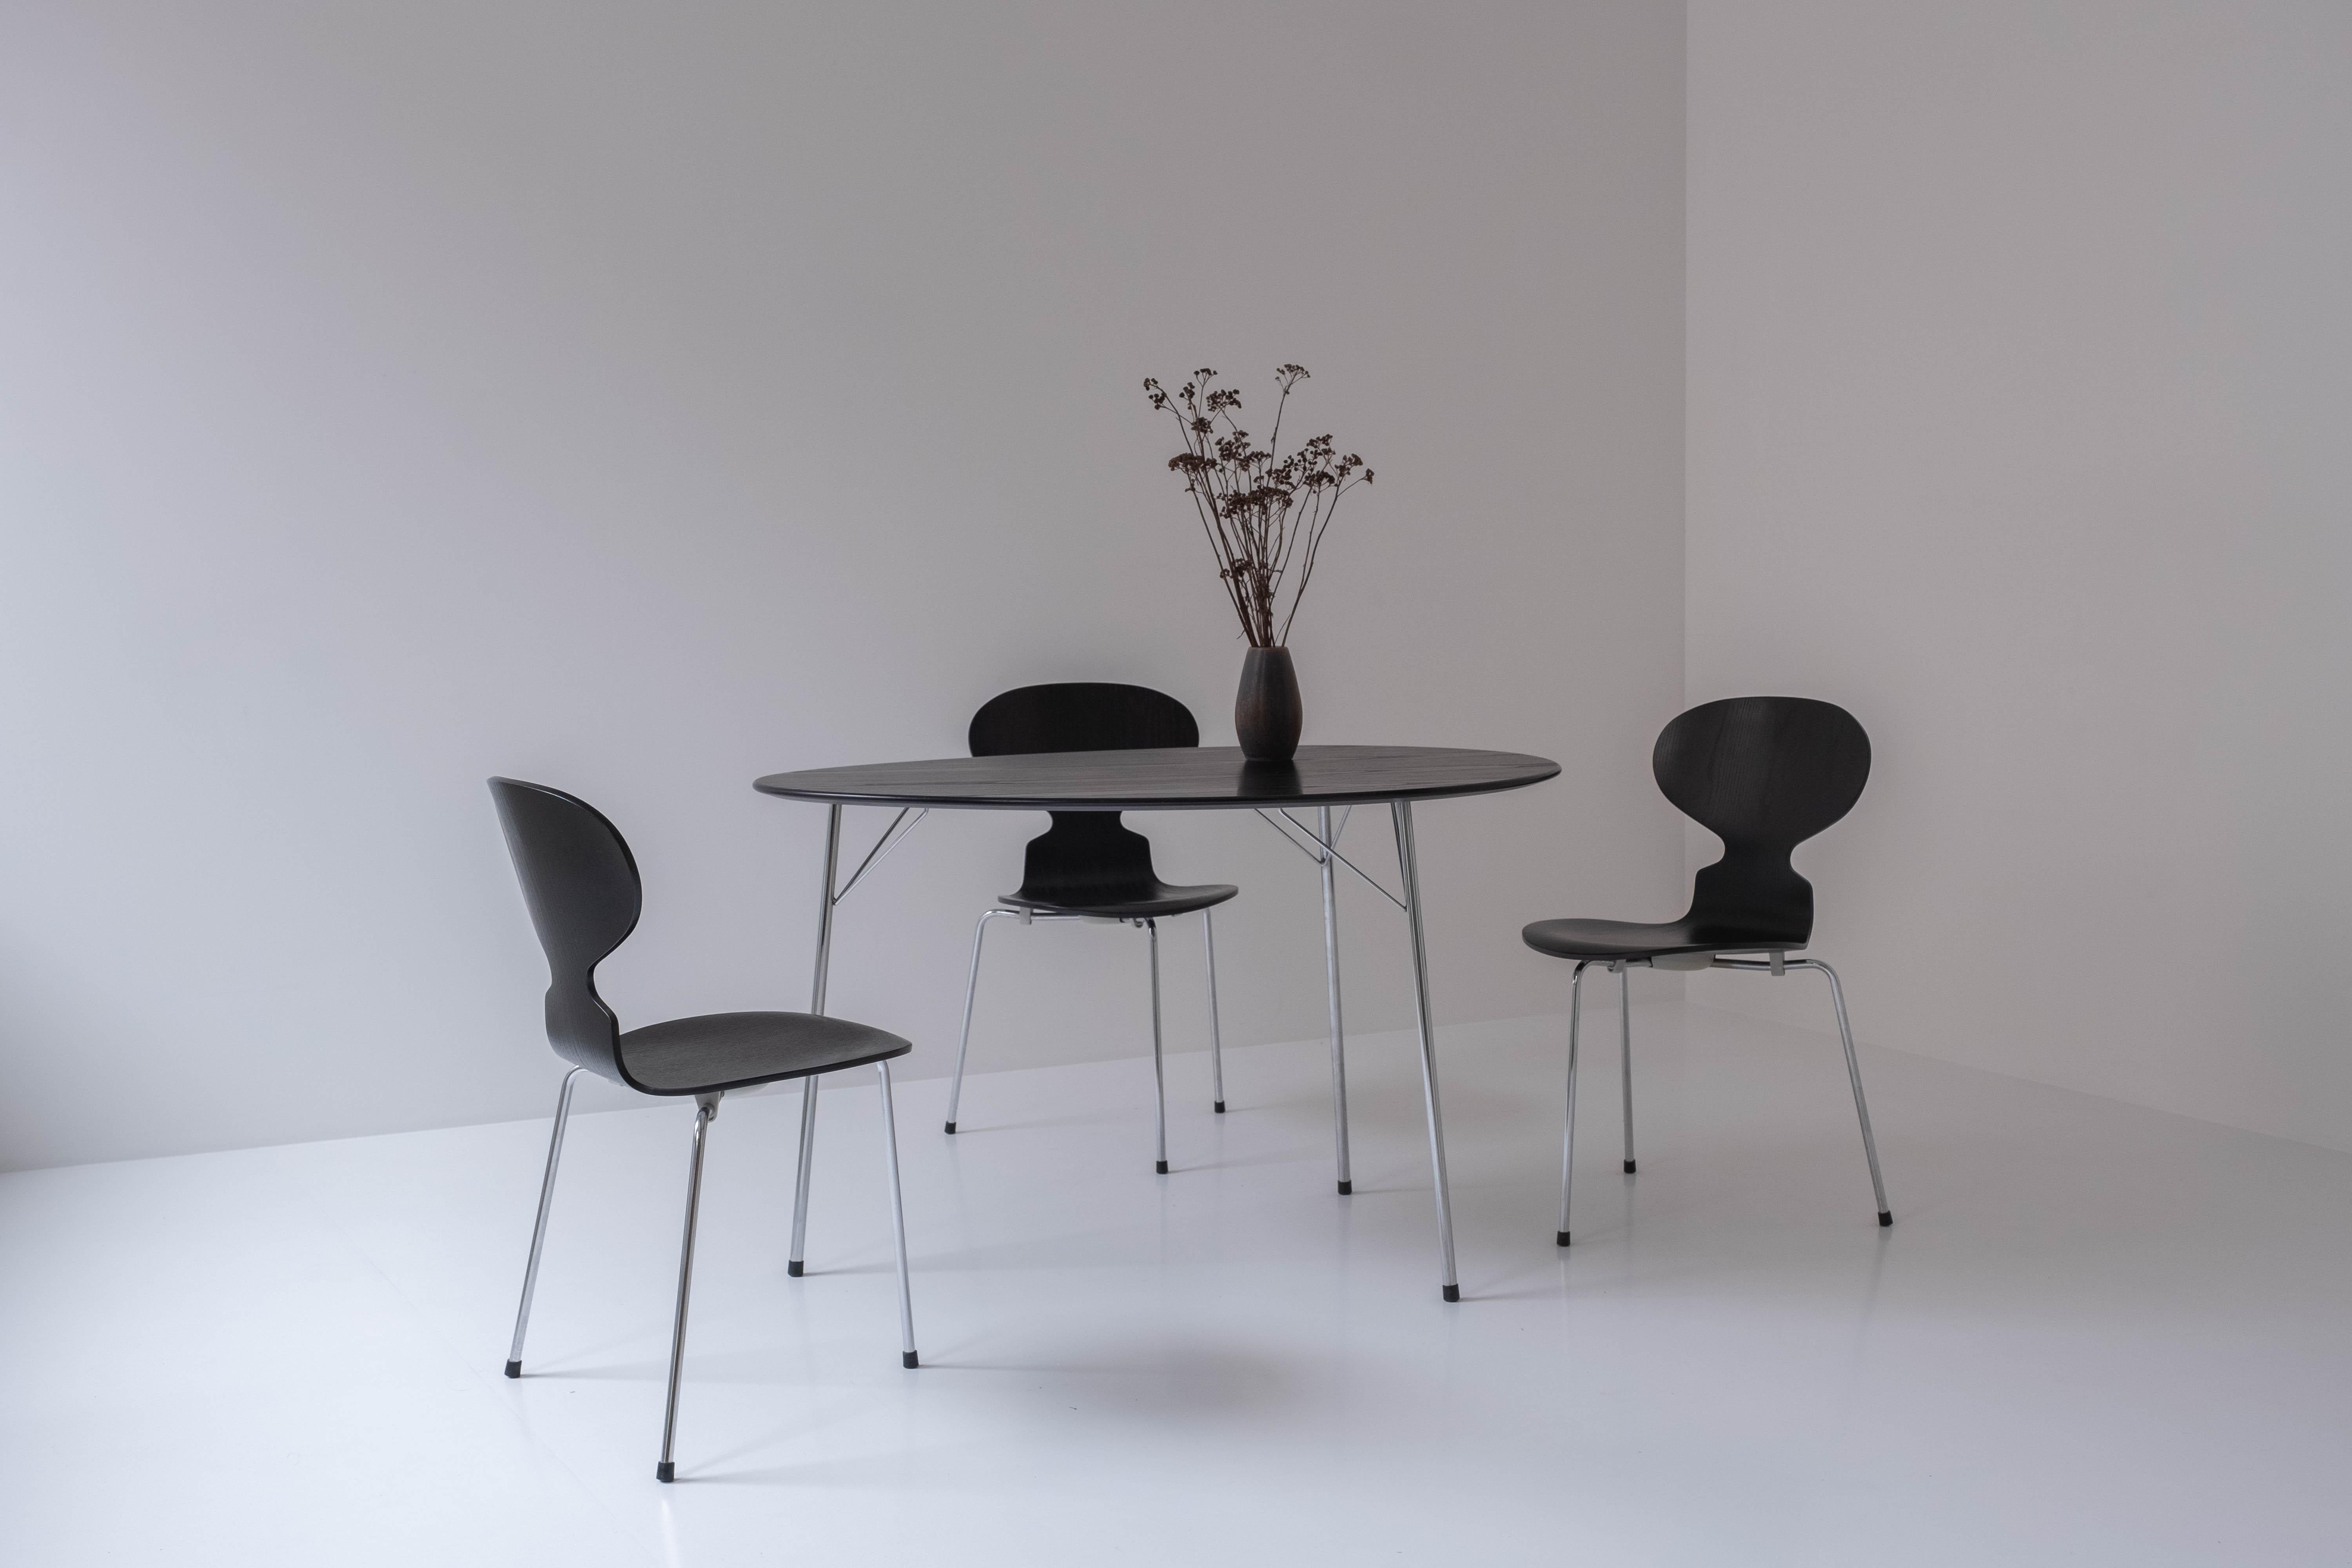 Rare ‘100th Anniversary’ set by Arne Jacobsen for Fritz Hansen. Originally designed in 1952, this set was released for the 100th anniversary of Arne Jacobsen’s birth. Only a limited production of 2000 pieces were sold worldwide and became highly